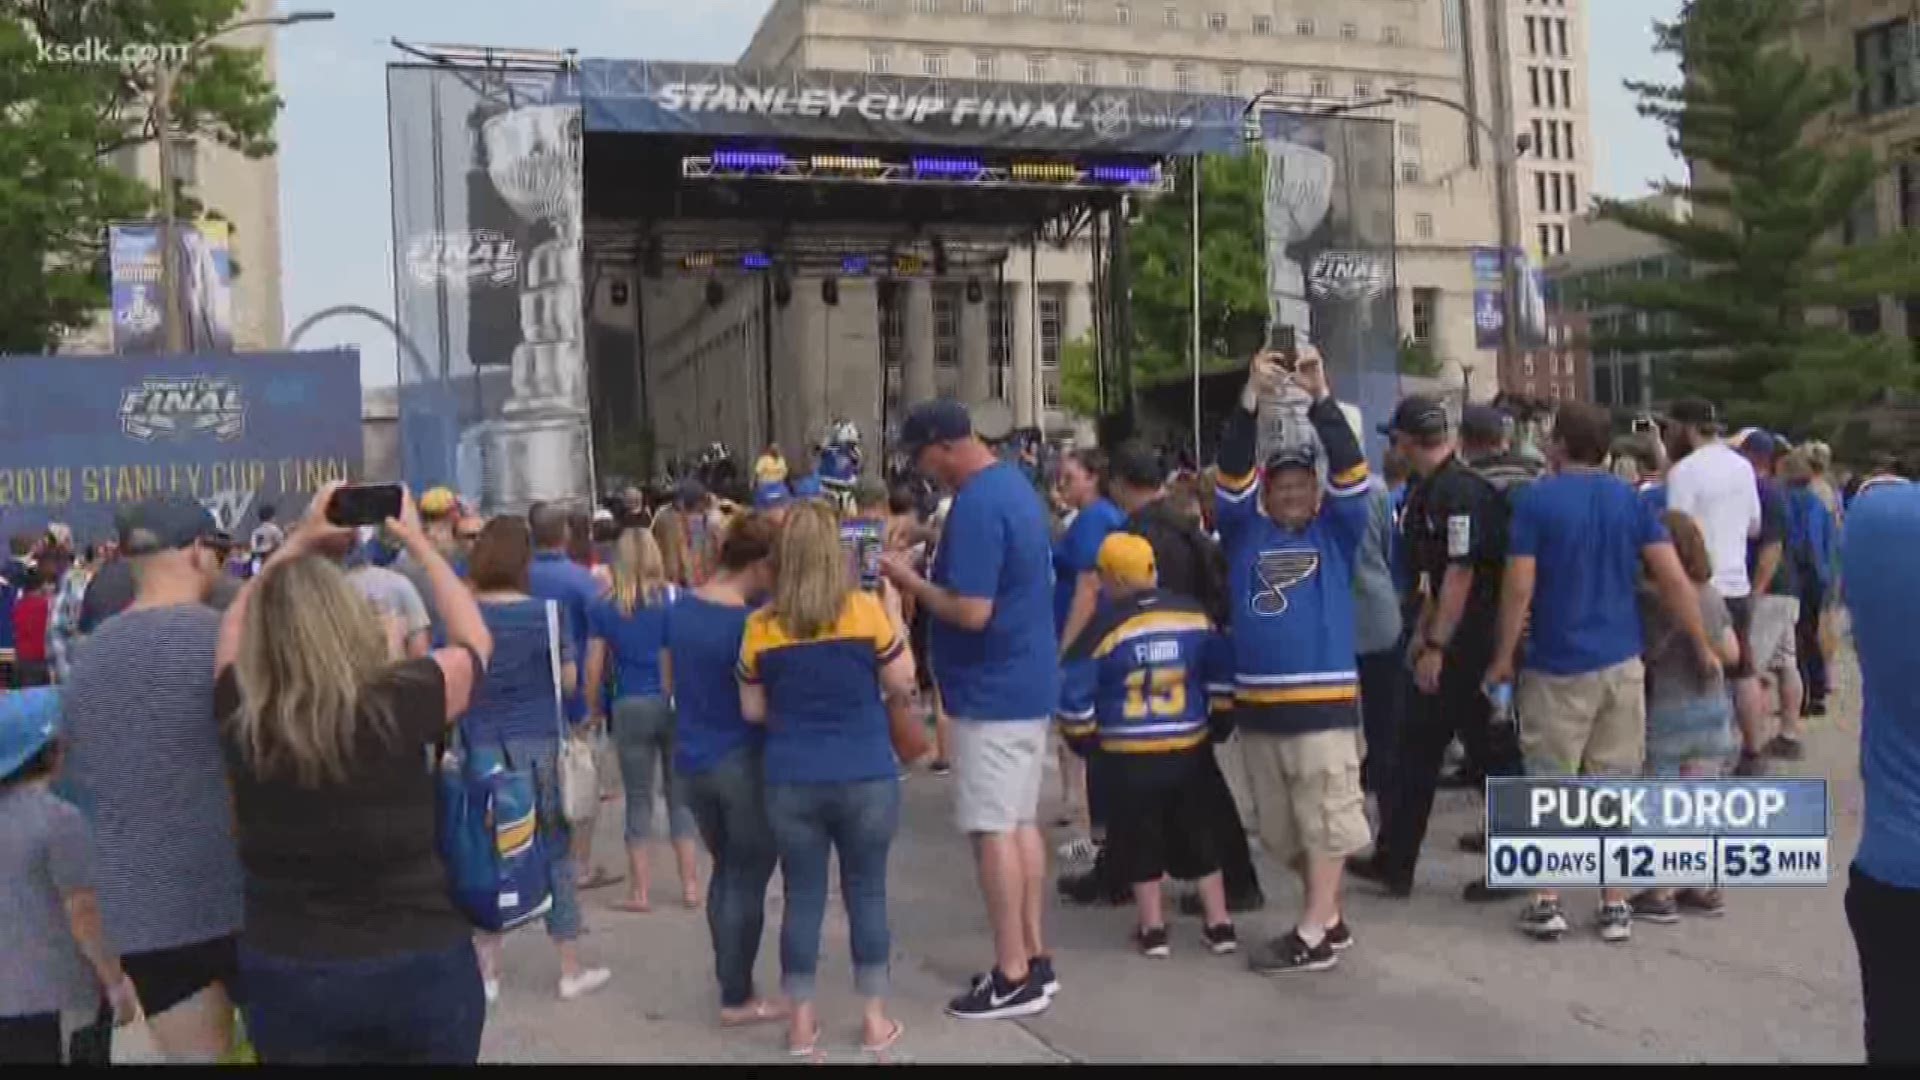 The Blues are one win away from their first Stanley Cup Final win. You can take part in the excitement downtown without having a ticket to the game.